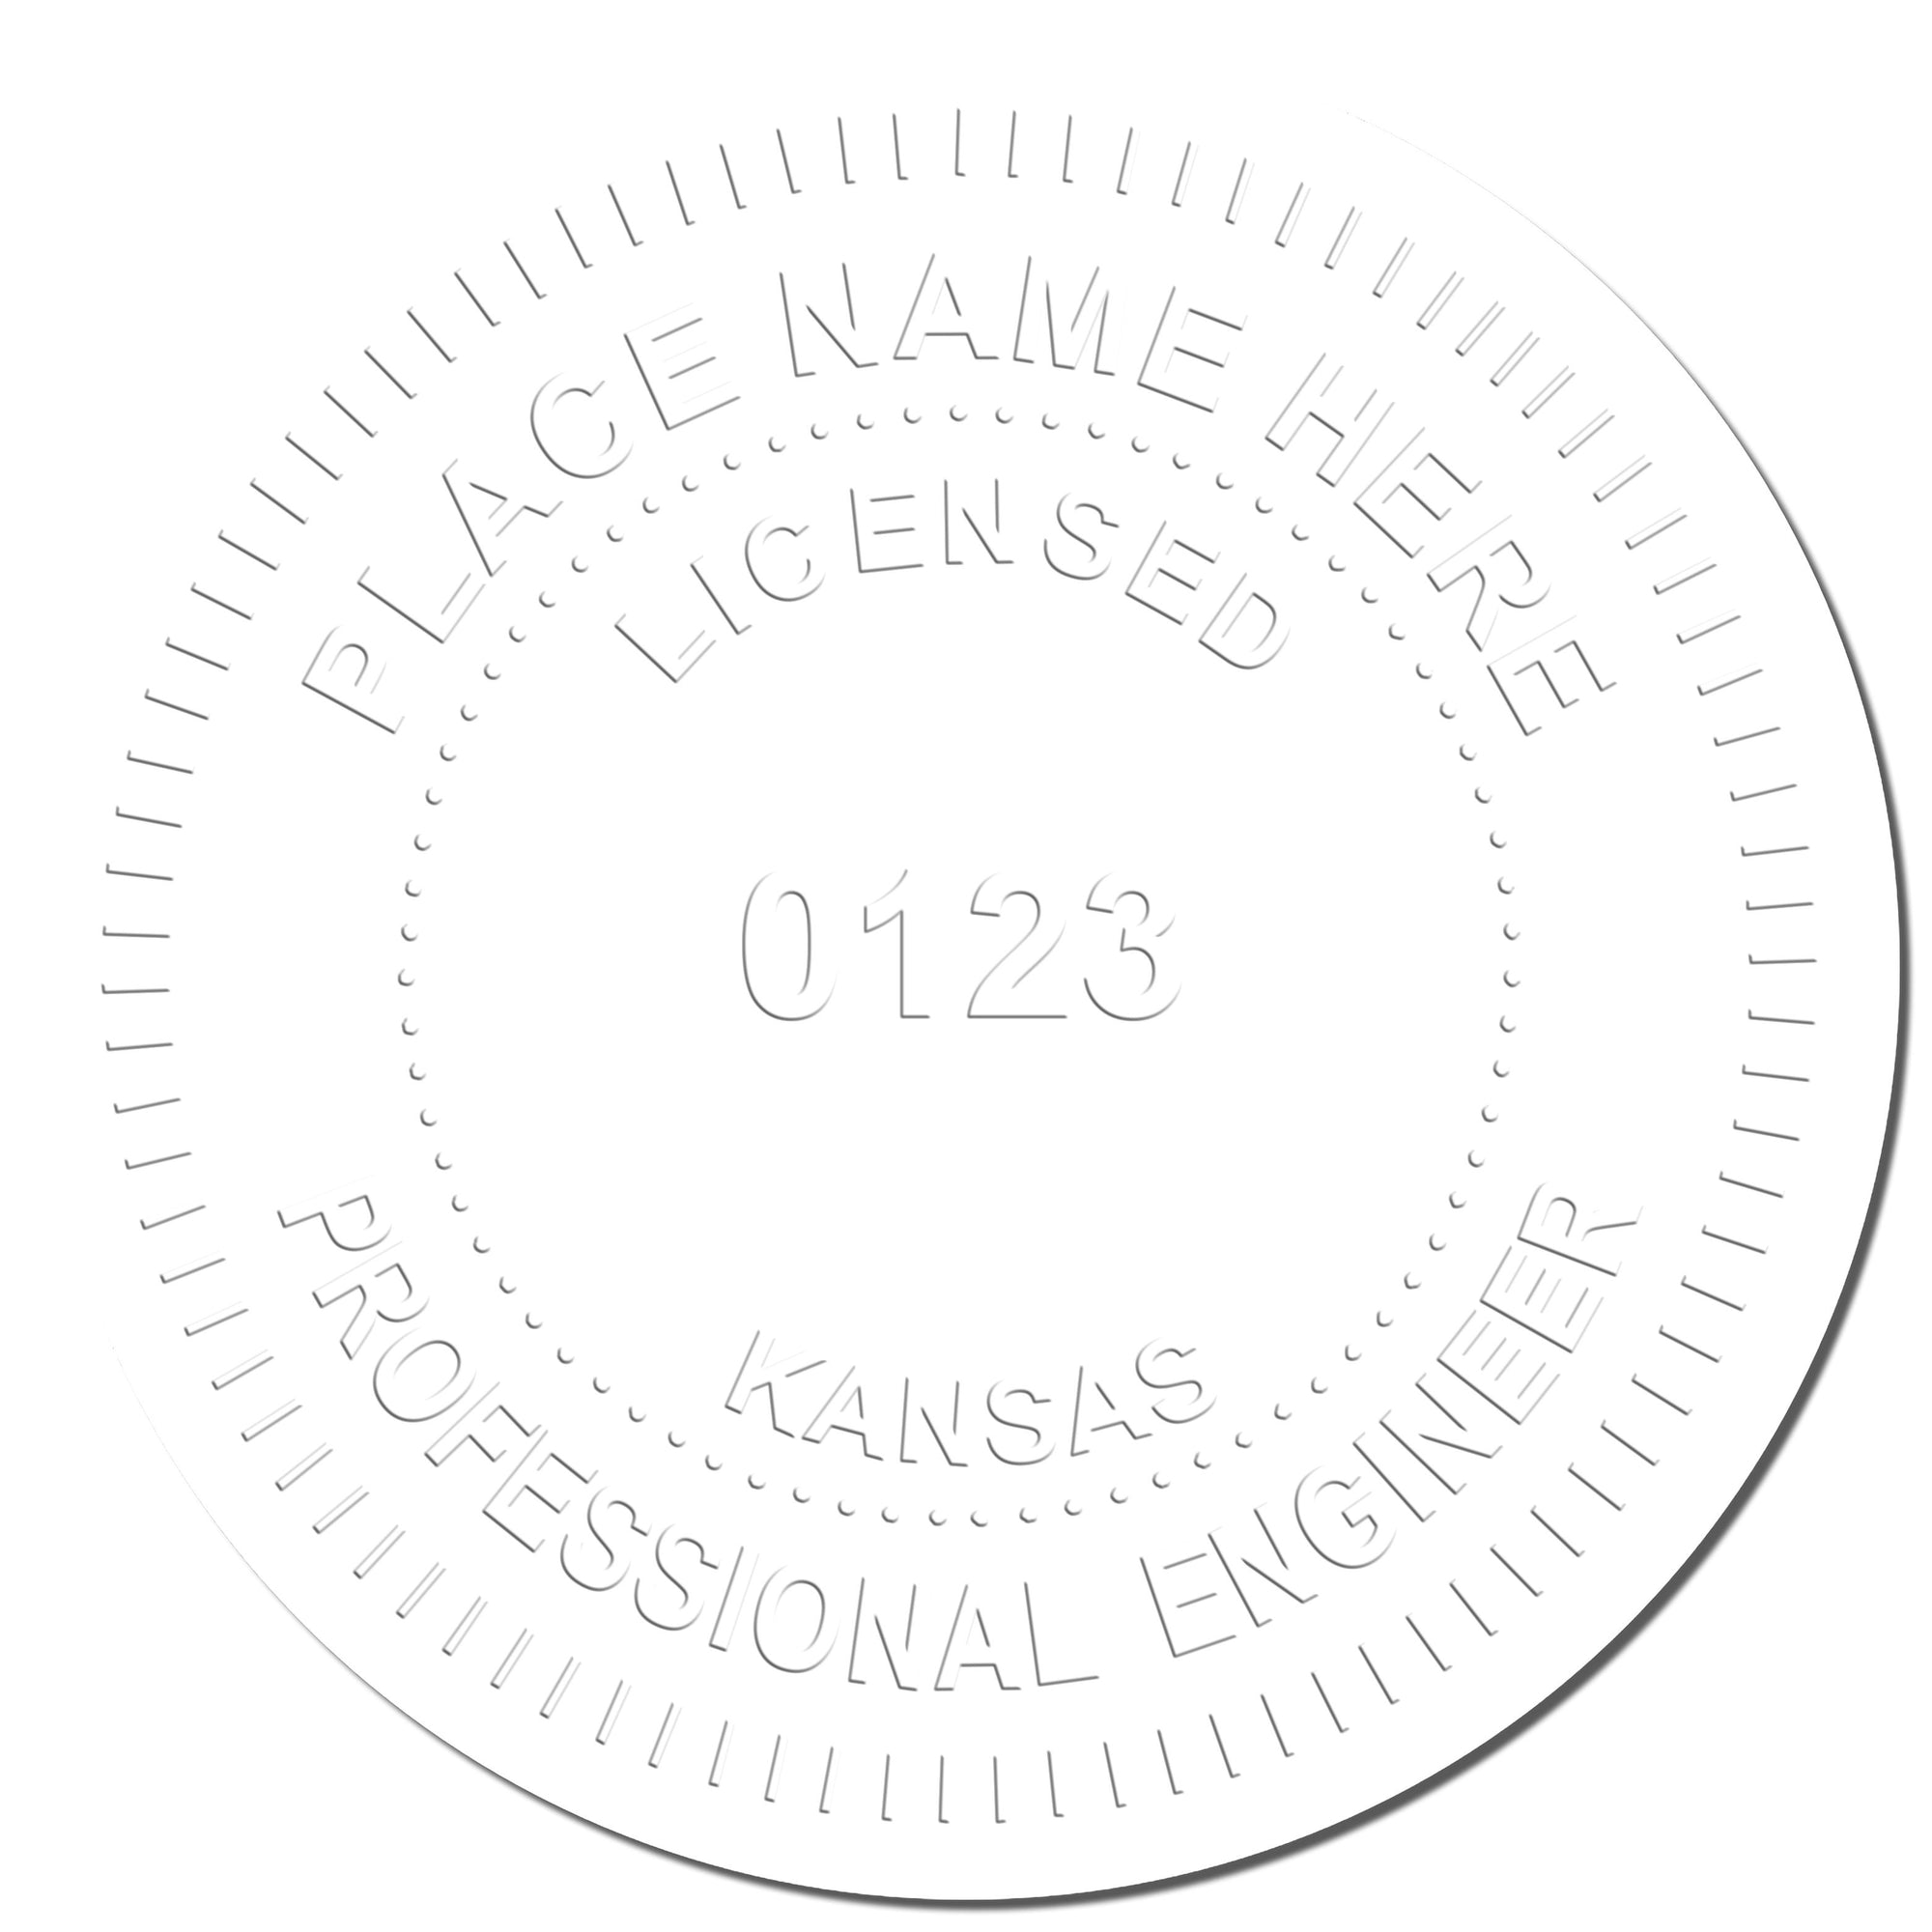 The main image for the Kansas Engineer Desk Seal depicting a sample of the imprint and electronic files